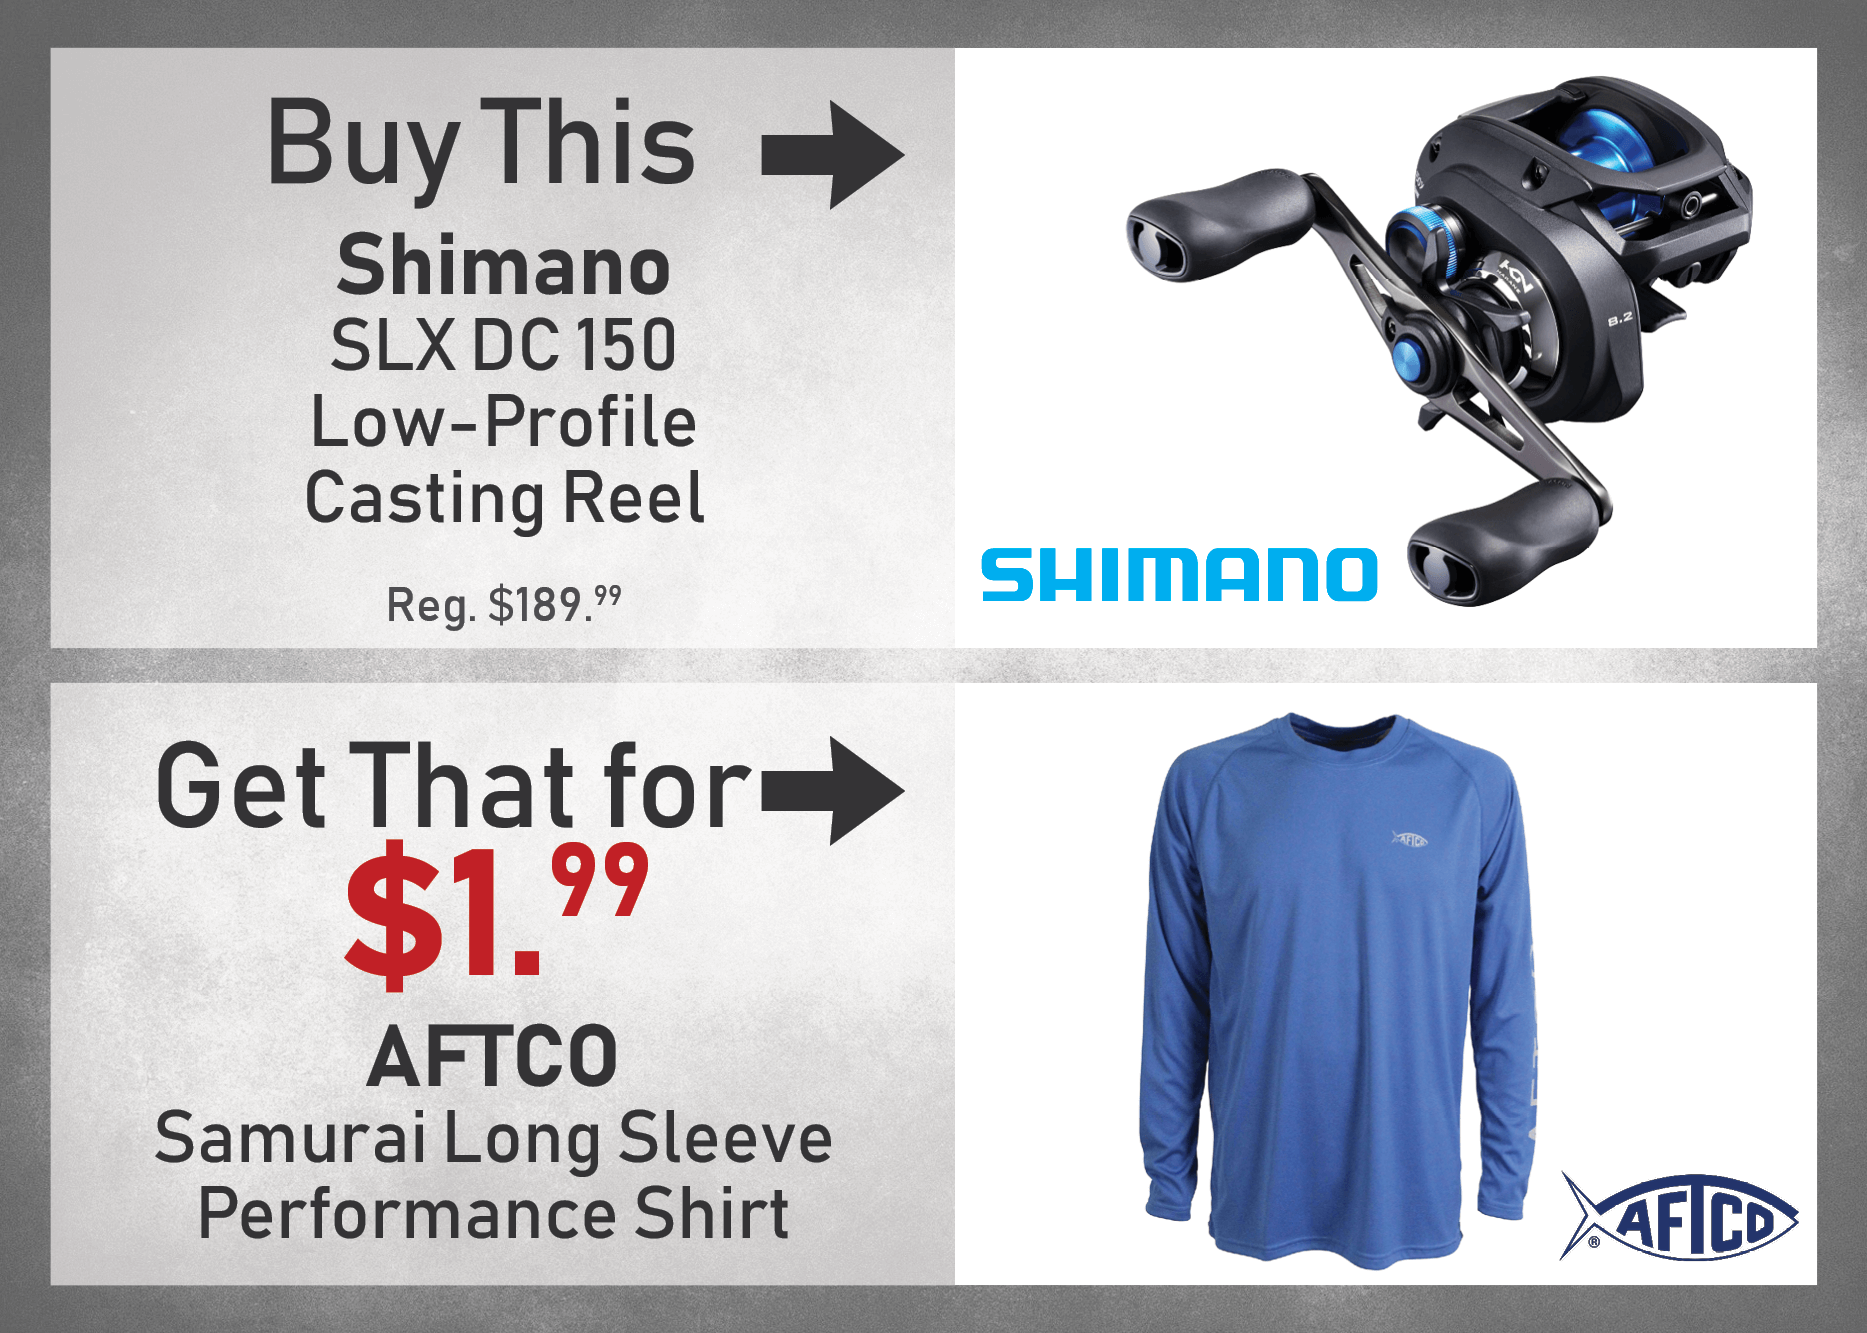 BUY a Shimano SLX DC 150 Low-Profile Casting Reel & GET an AFTCO Sumurai Long Sleeve Performance Shirt for $1.99